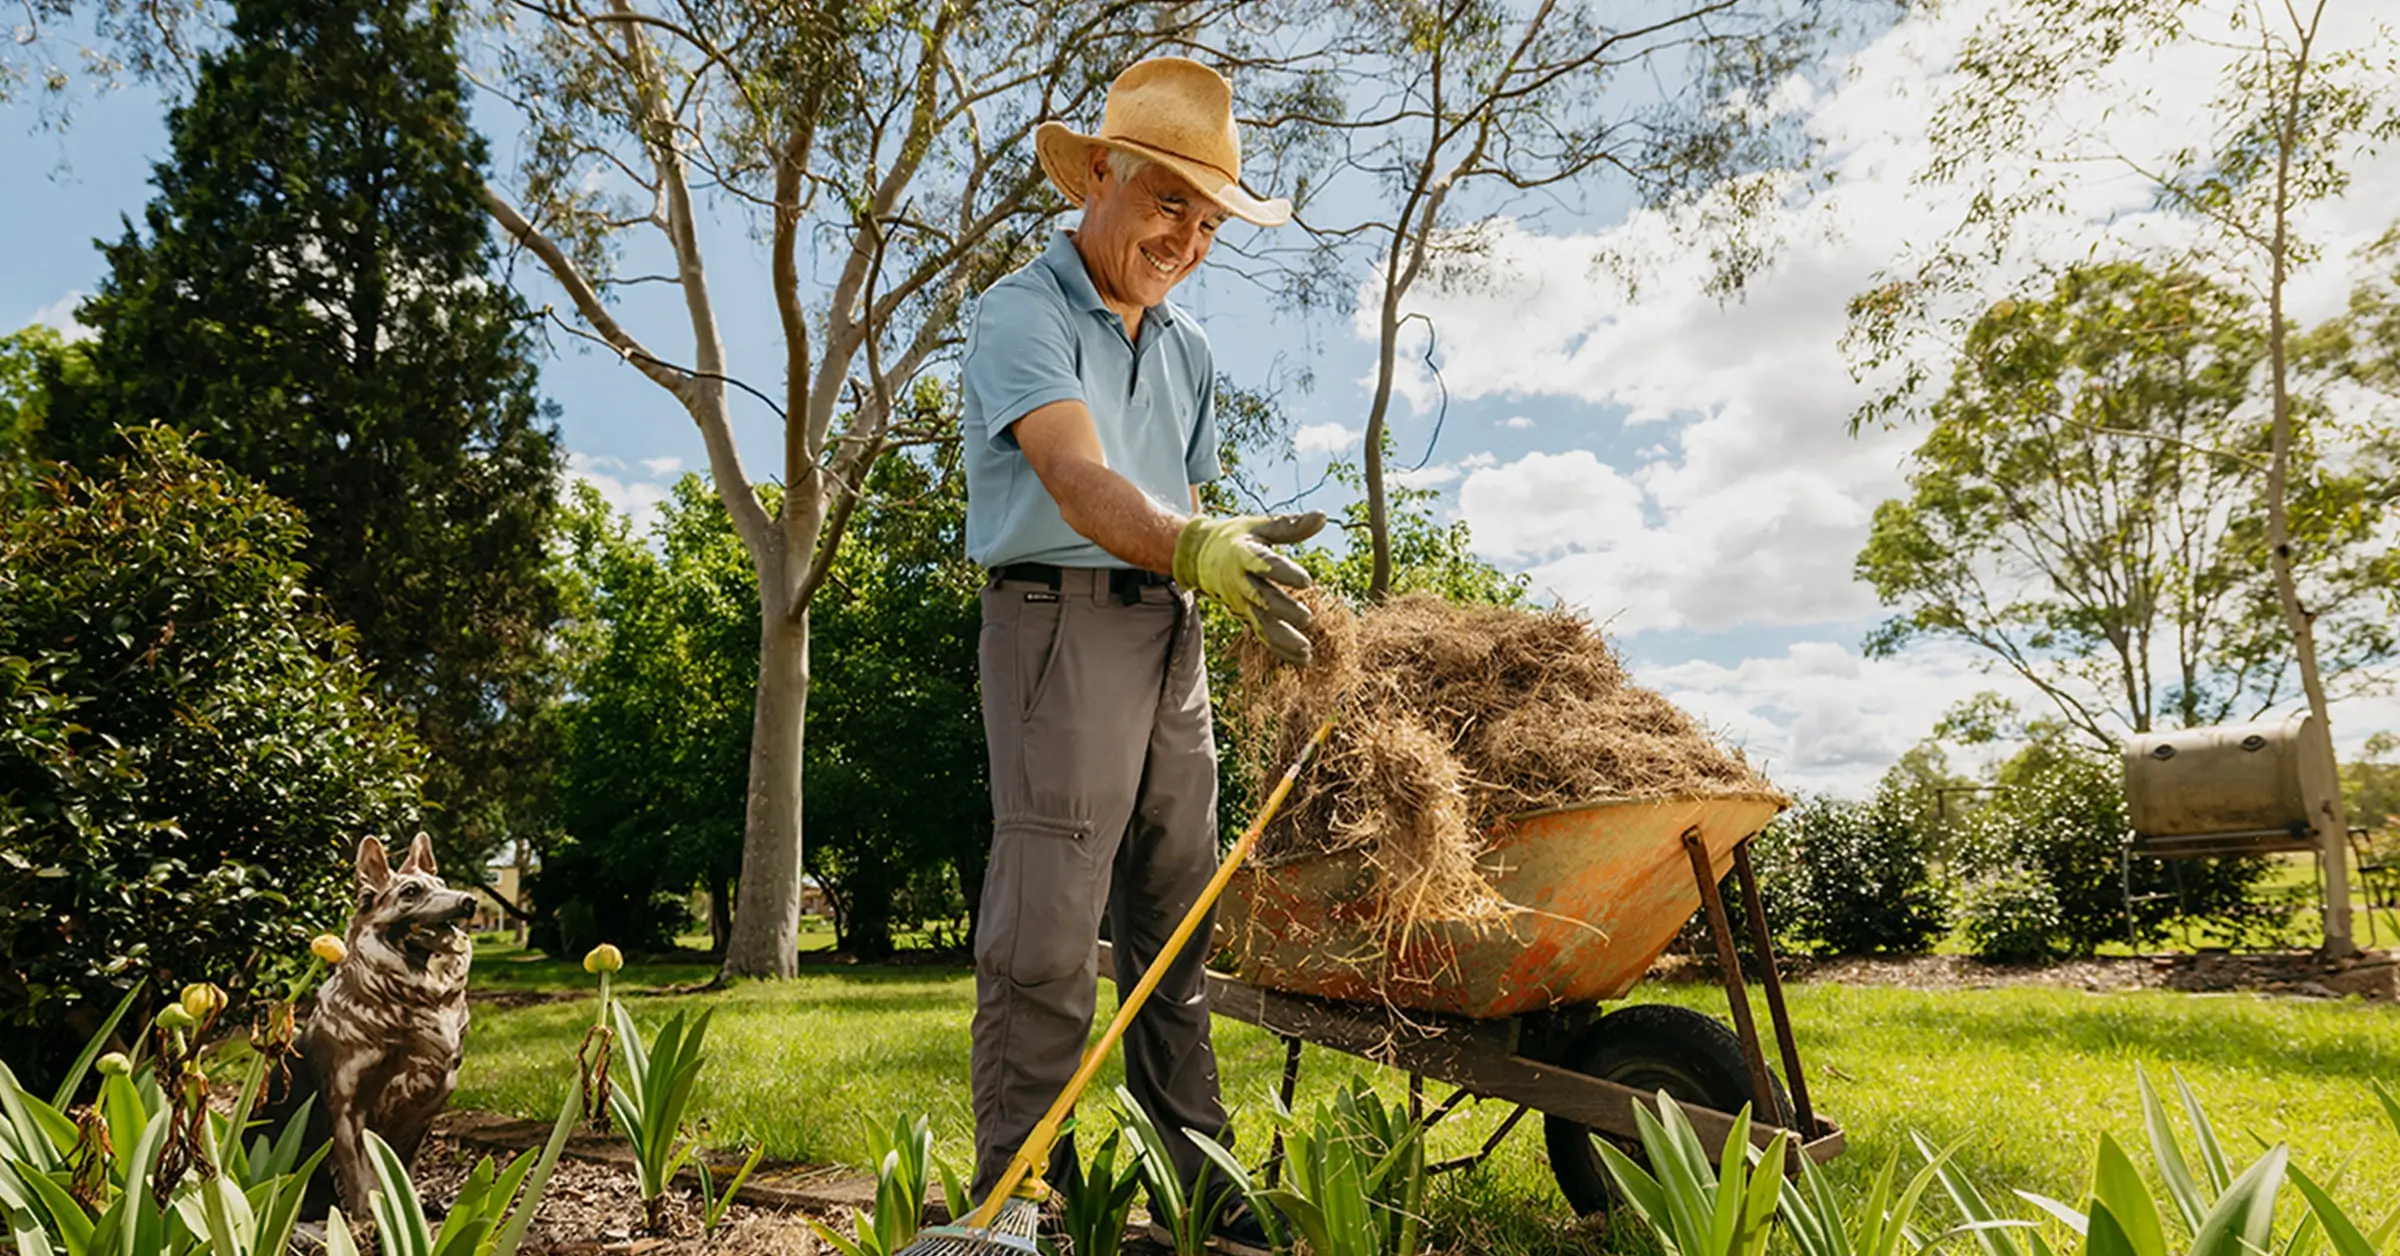 Support worker holds mulch while gardening in plant bed with rake and wheelbarrow.